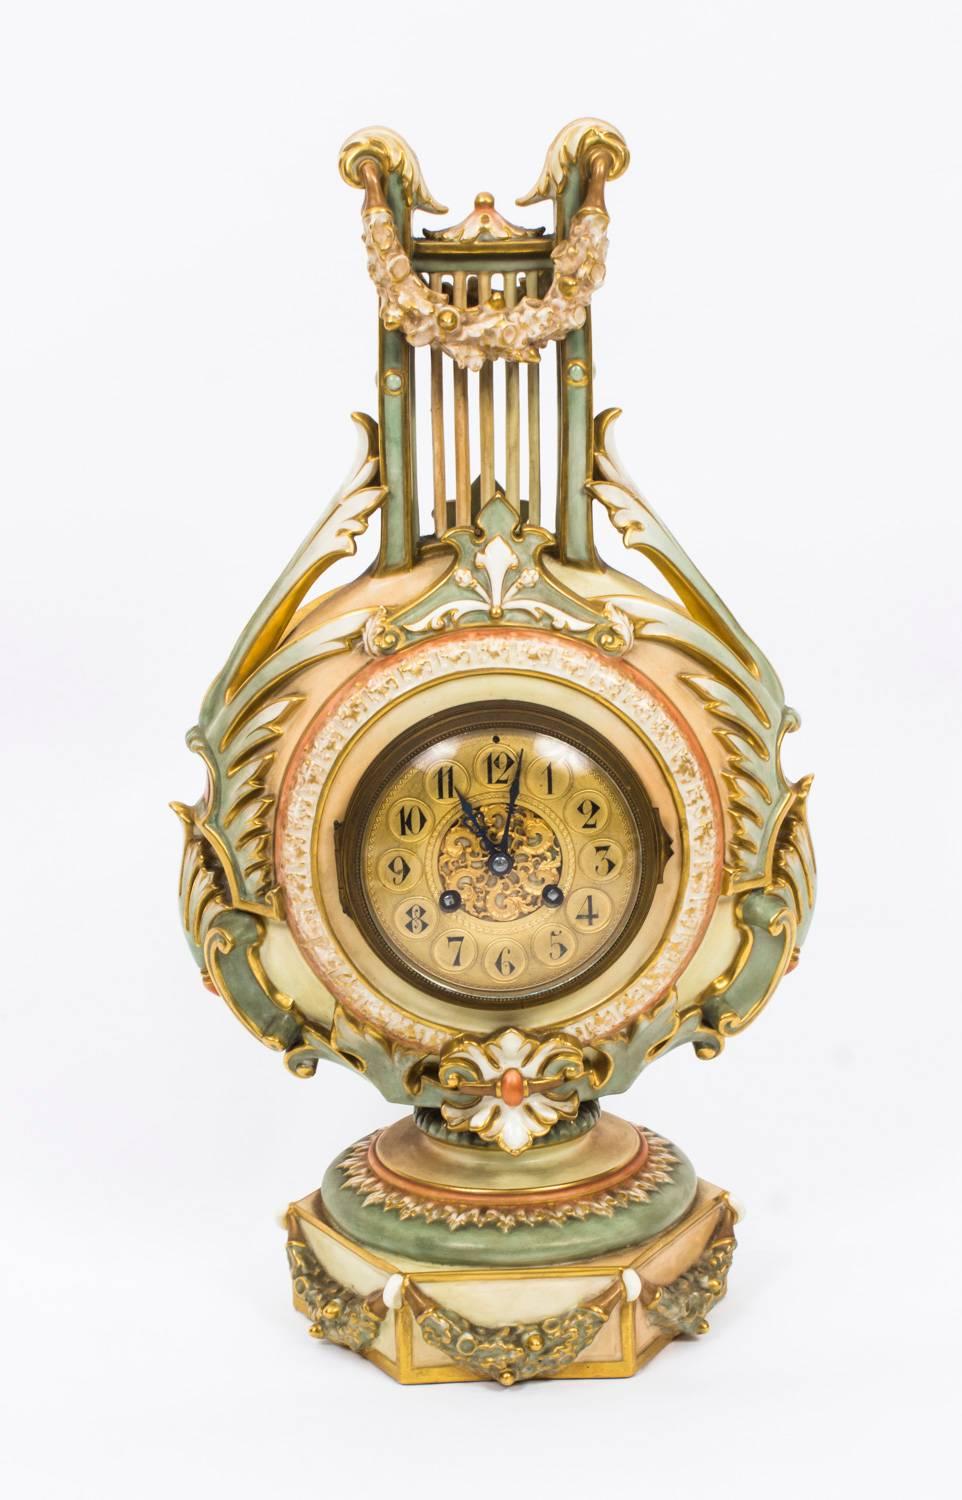 This is a truly exquisite and rare late Victorian Royal Worcester blush porcelain lyre cased mantel clock, dated 1900.

The gilded dial set within a beautiful foliate wreath and raised on a decorative octagonal platform base, the No.1385 is